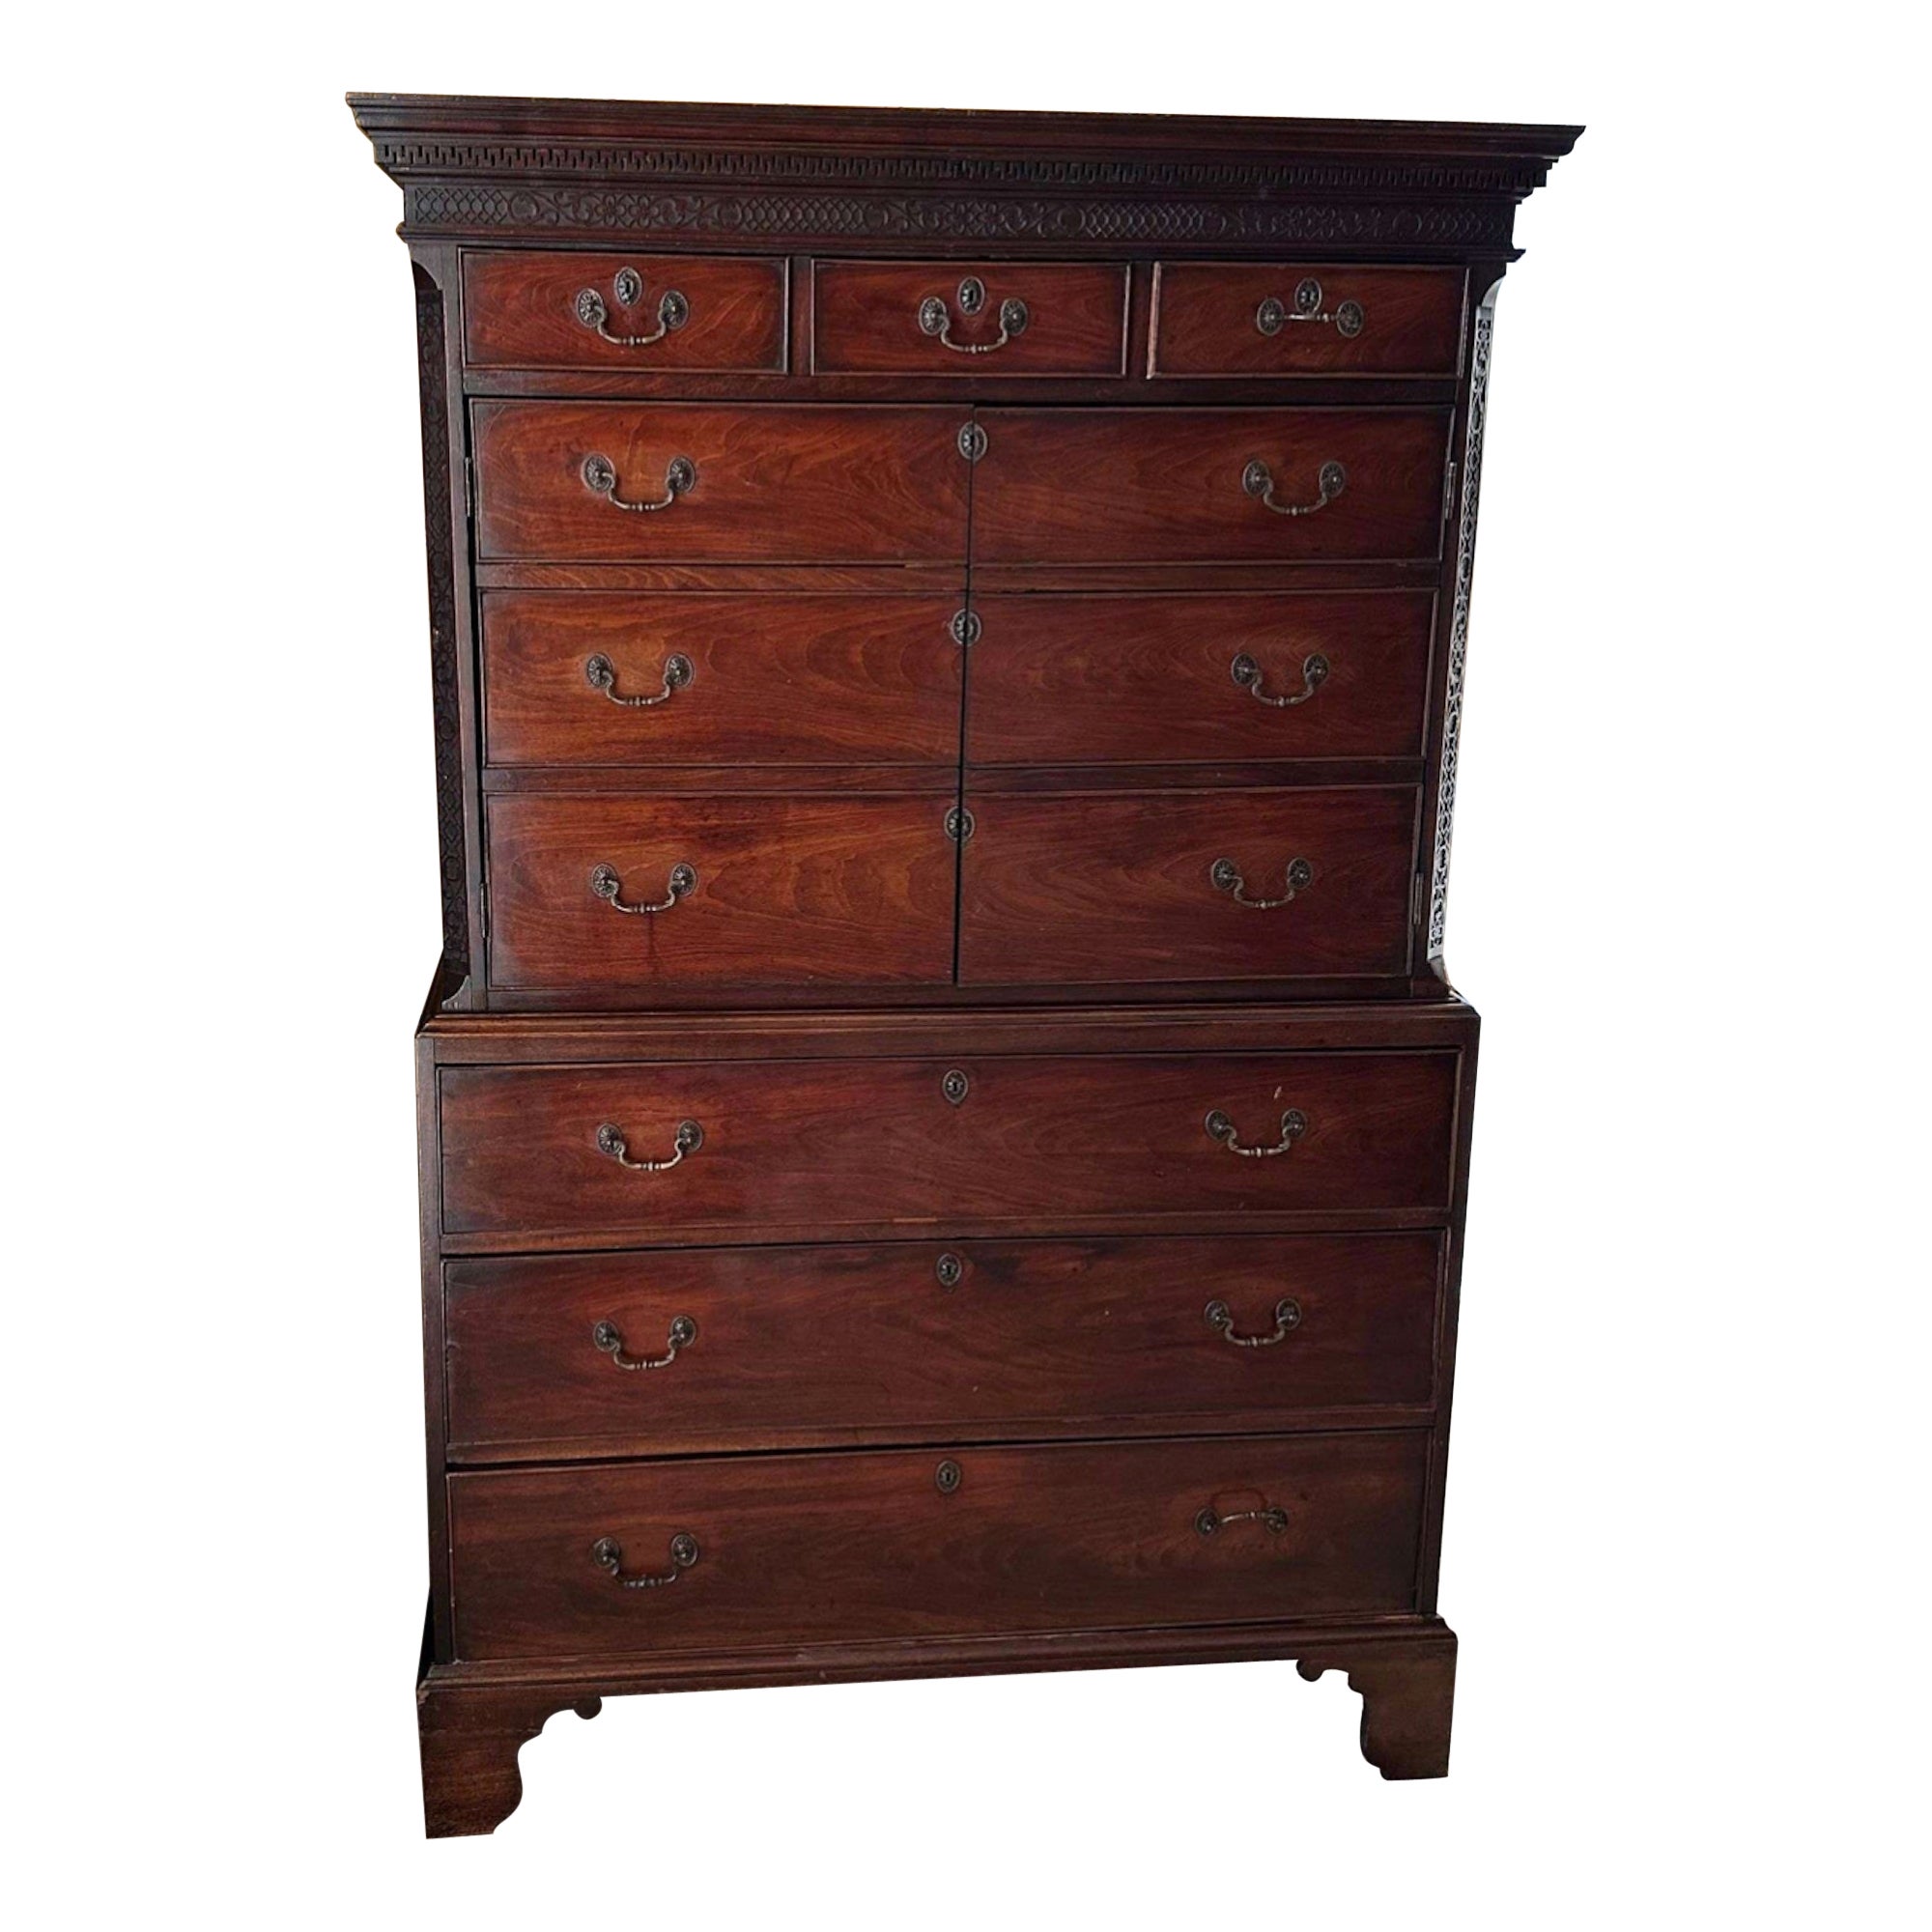 A George III mahogany chest on chest with applied blind fretworadpated as a bar.